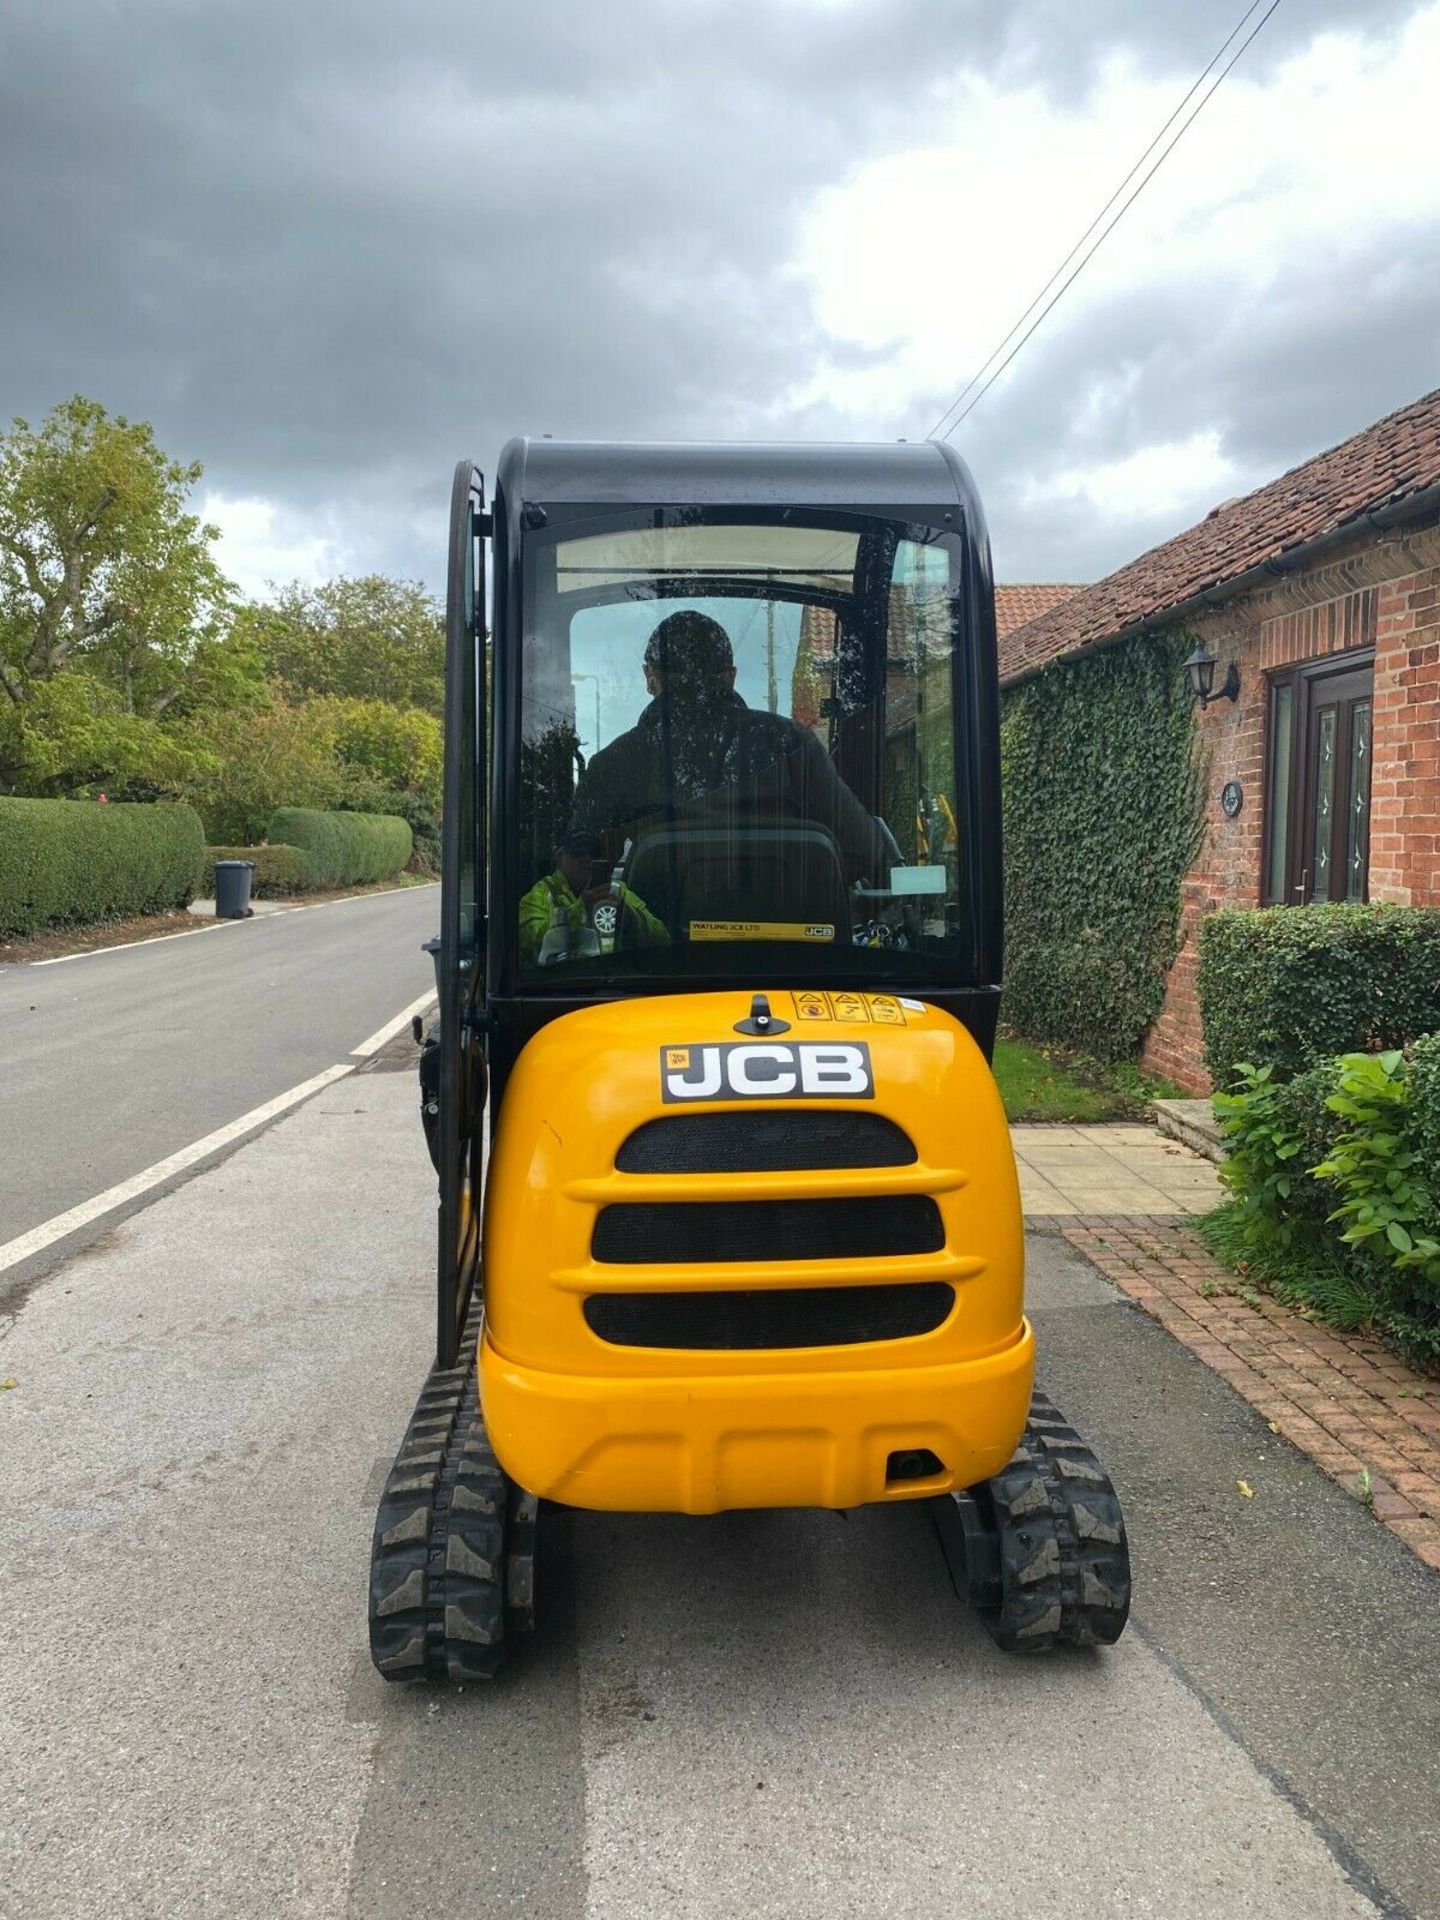 JCB MINI EXCAVATOR 8018 CTS, ONLY 236 HOURS FROM NEW, FULL CAB, 1 OWNER GENUINE *PLUS VAT* - Image 9 of 10